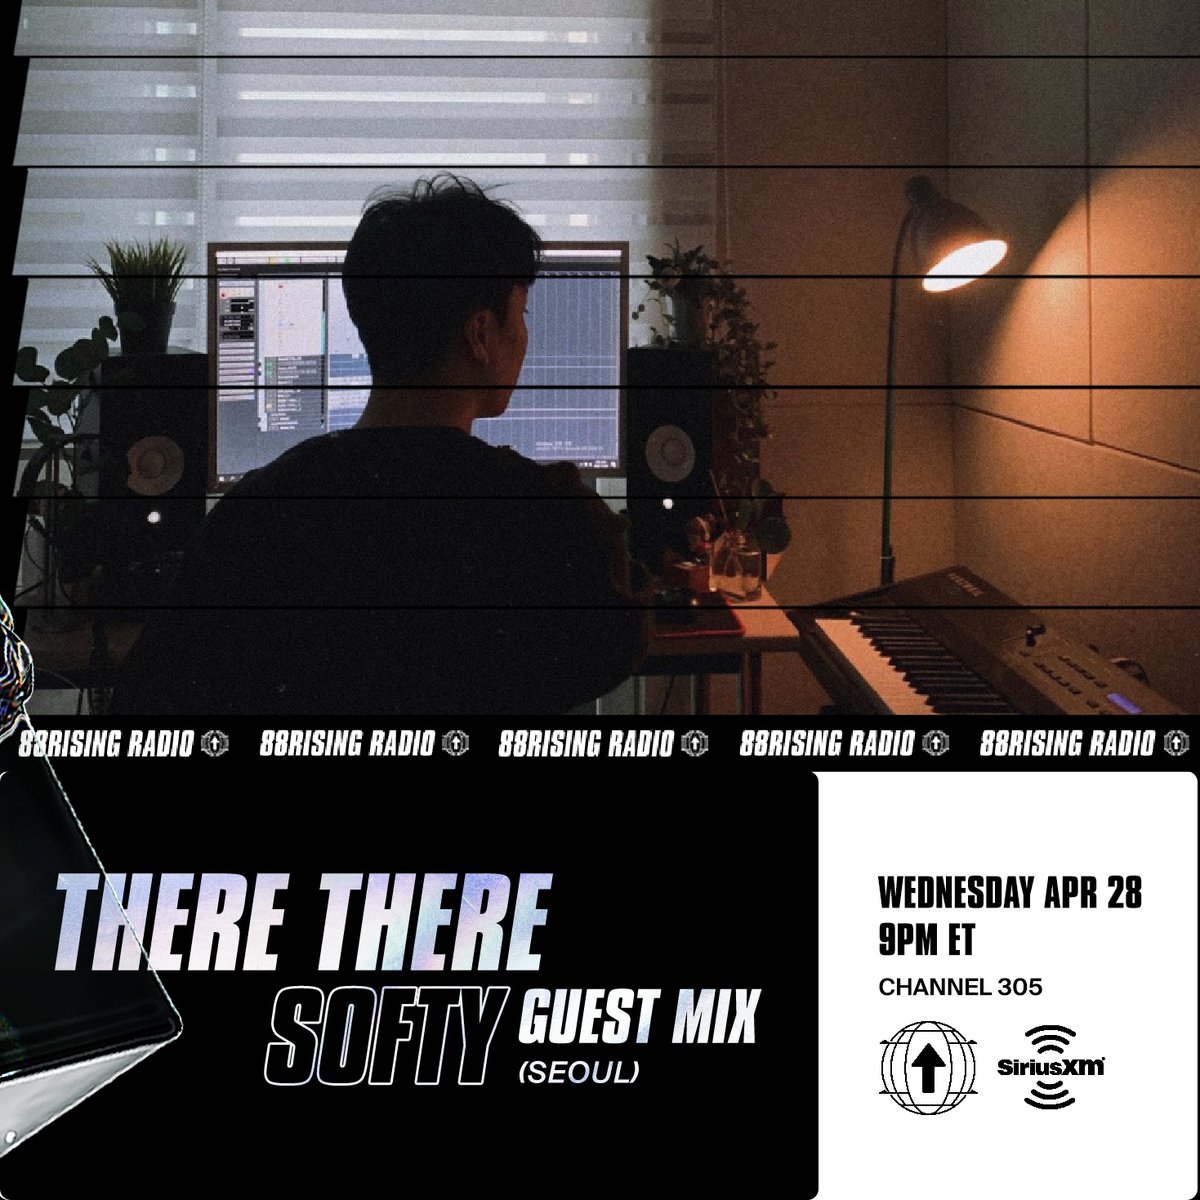 Tomorrow night on #ThereThere: @softy_hs - a producer based in Seoul, South Korea 🇰🇷 Tune in to his mix filled with sounds by him @Ambulomusic @_fantompower @oatmellofi @lucidgreenmusic @Thaehan_ and many more Tomorrow 9pm ET @SIRIUSXM channel 305